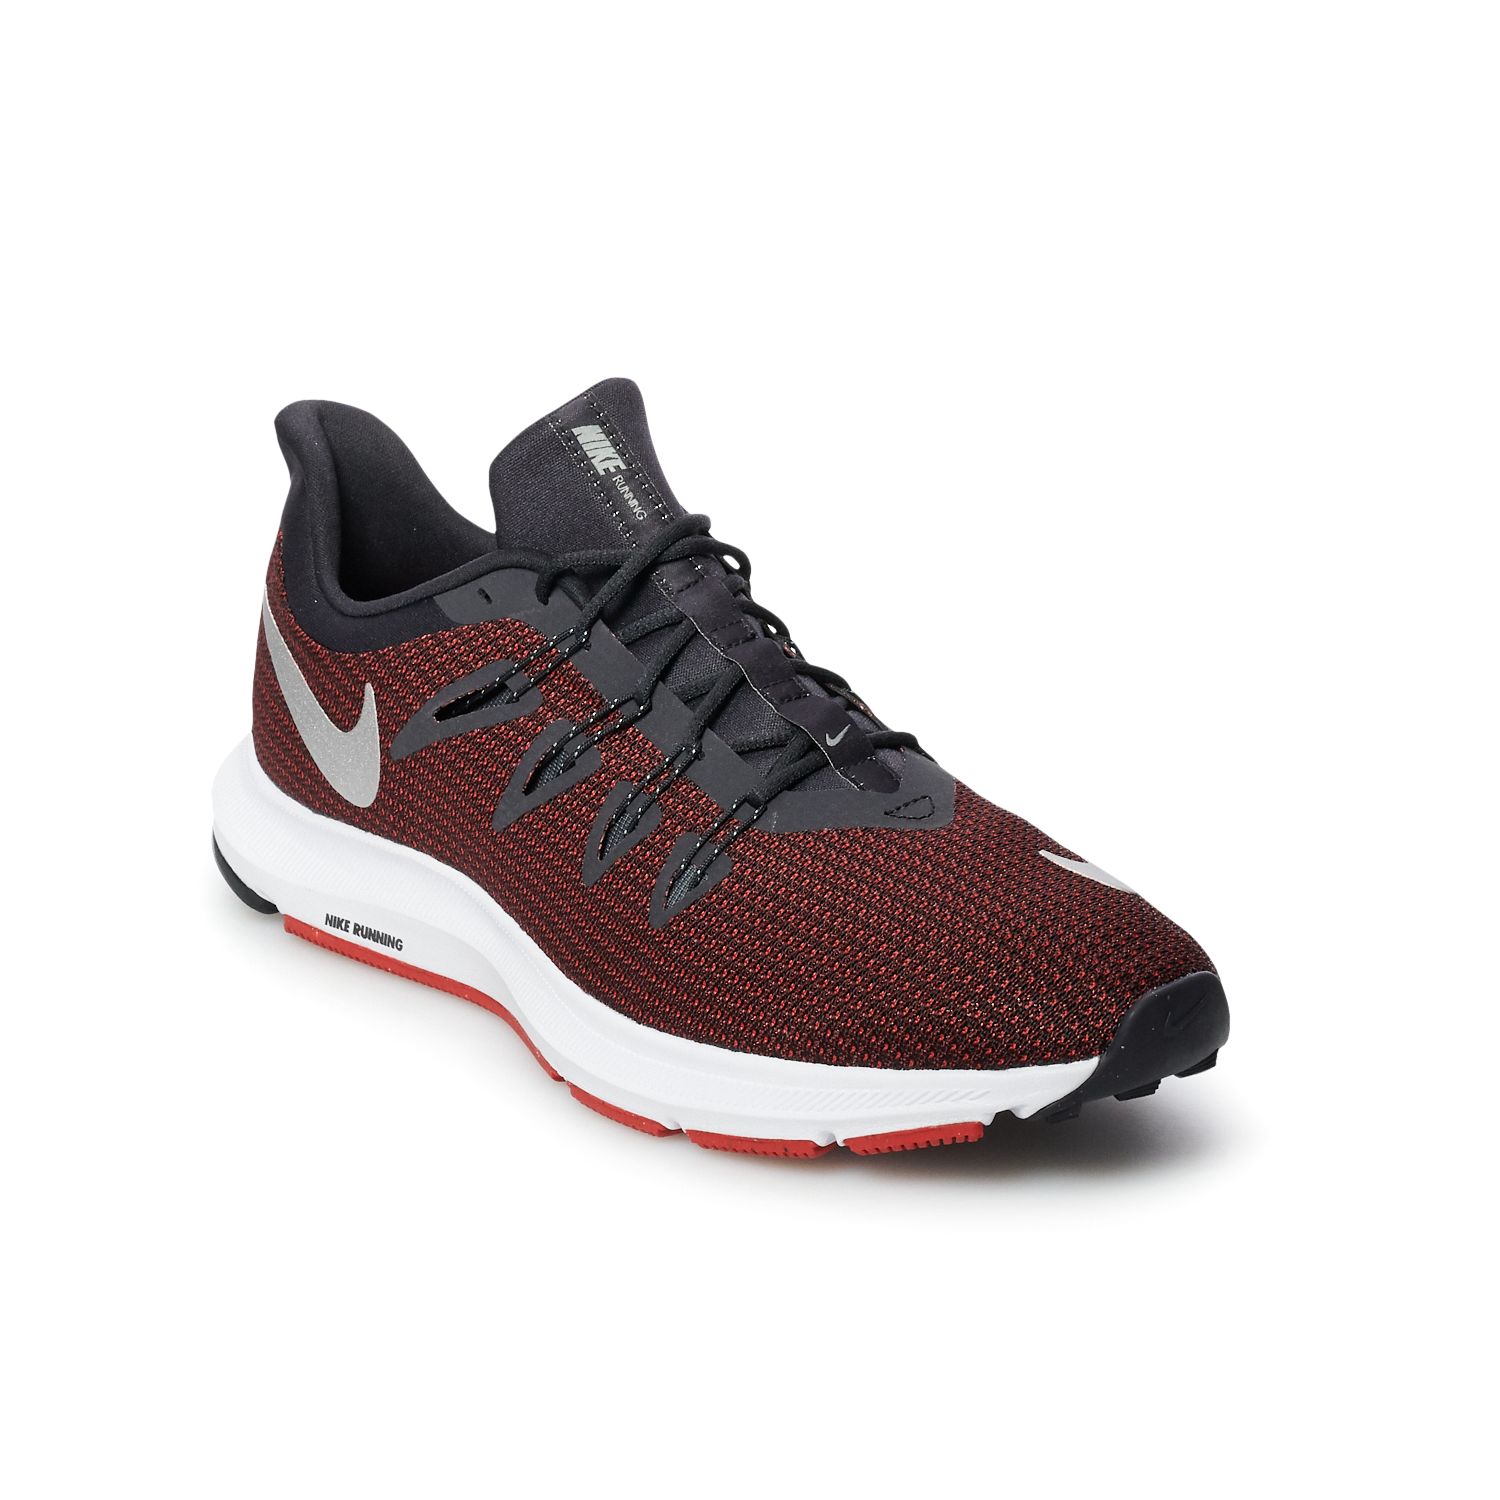 men's nike quest running shoes